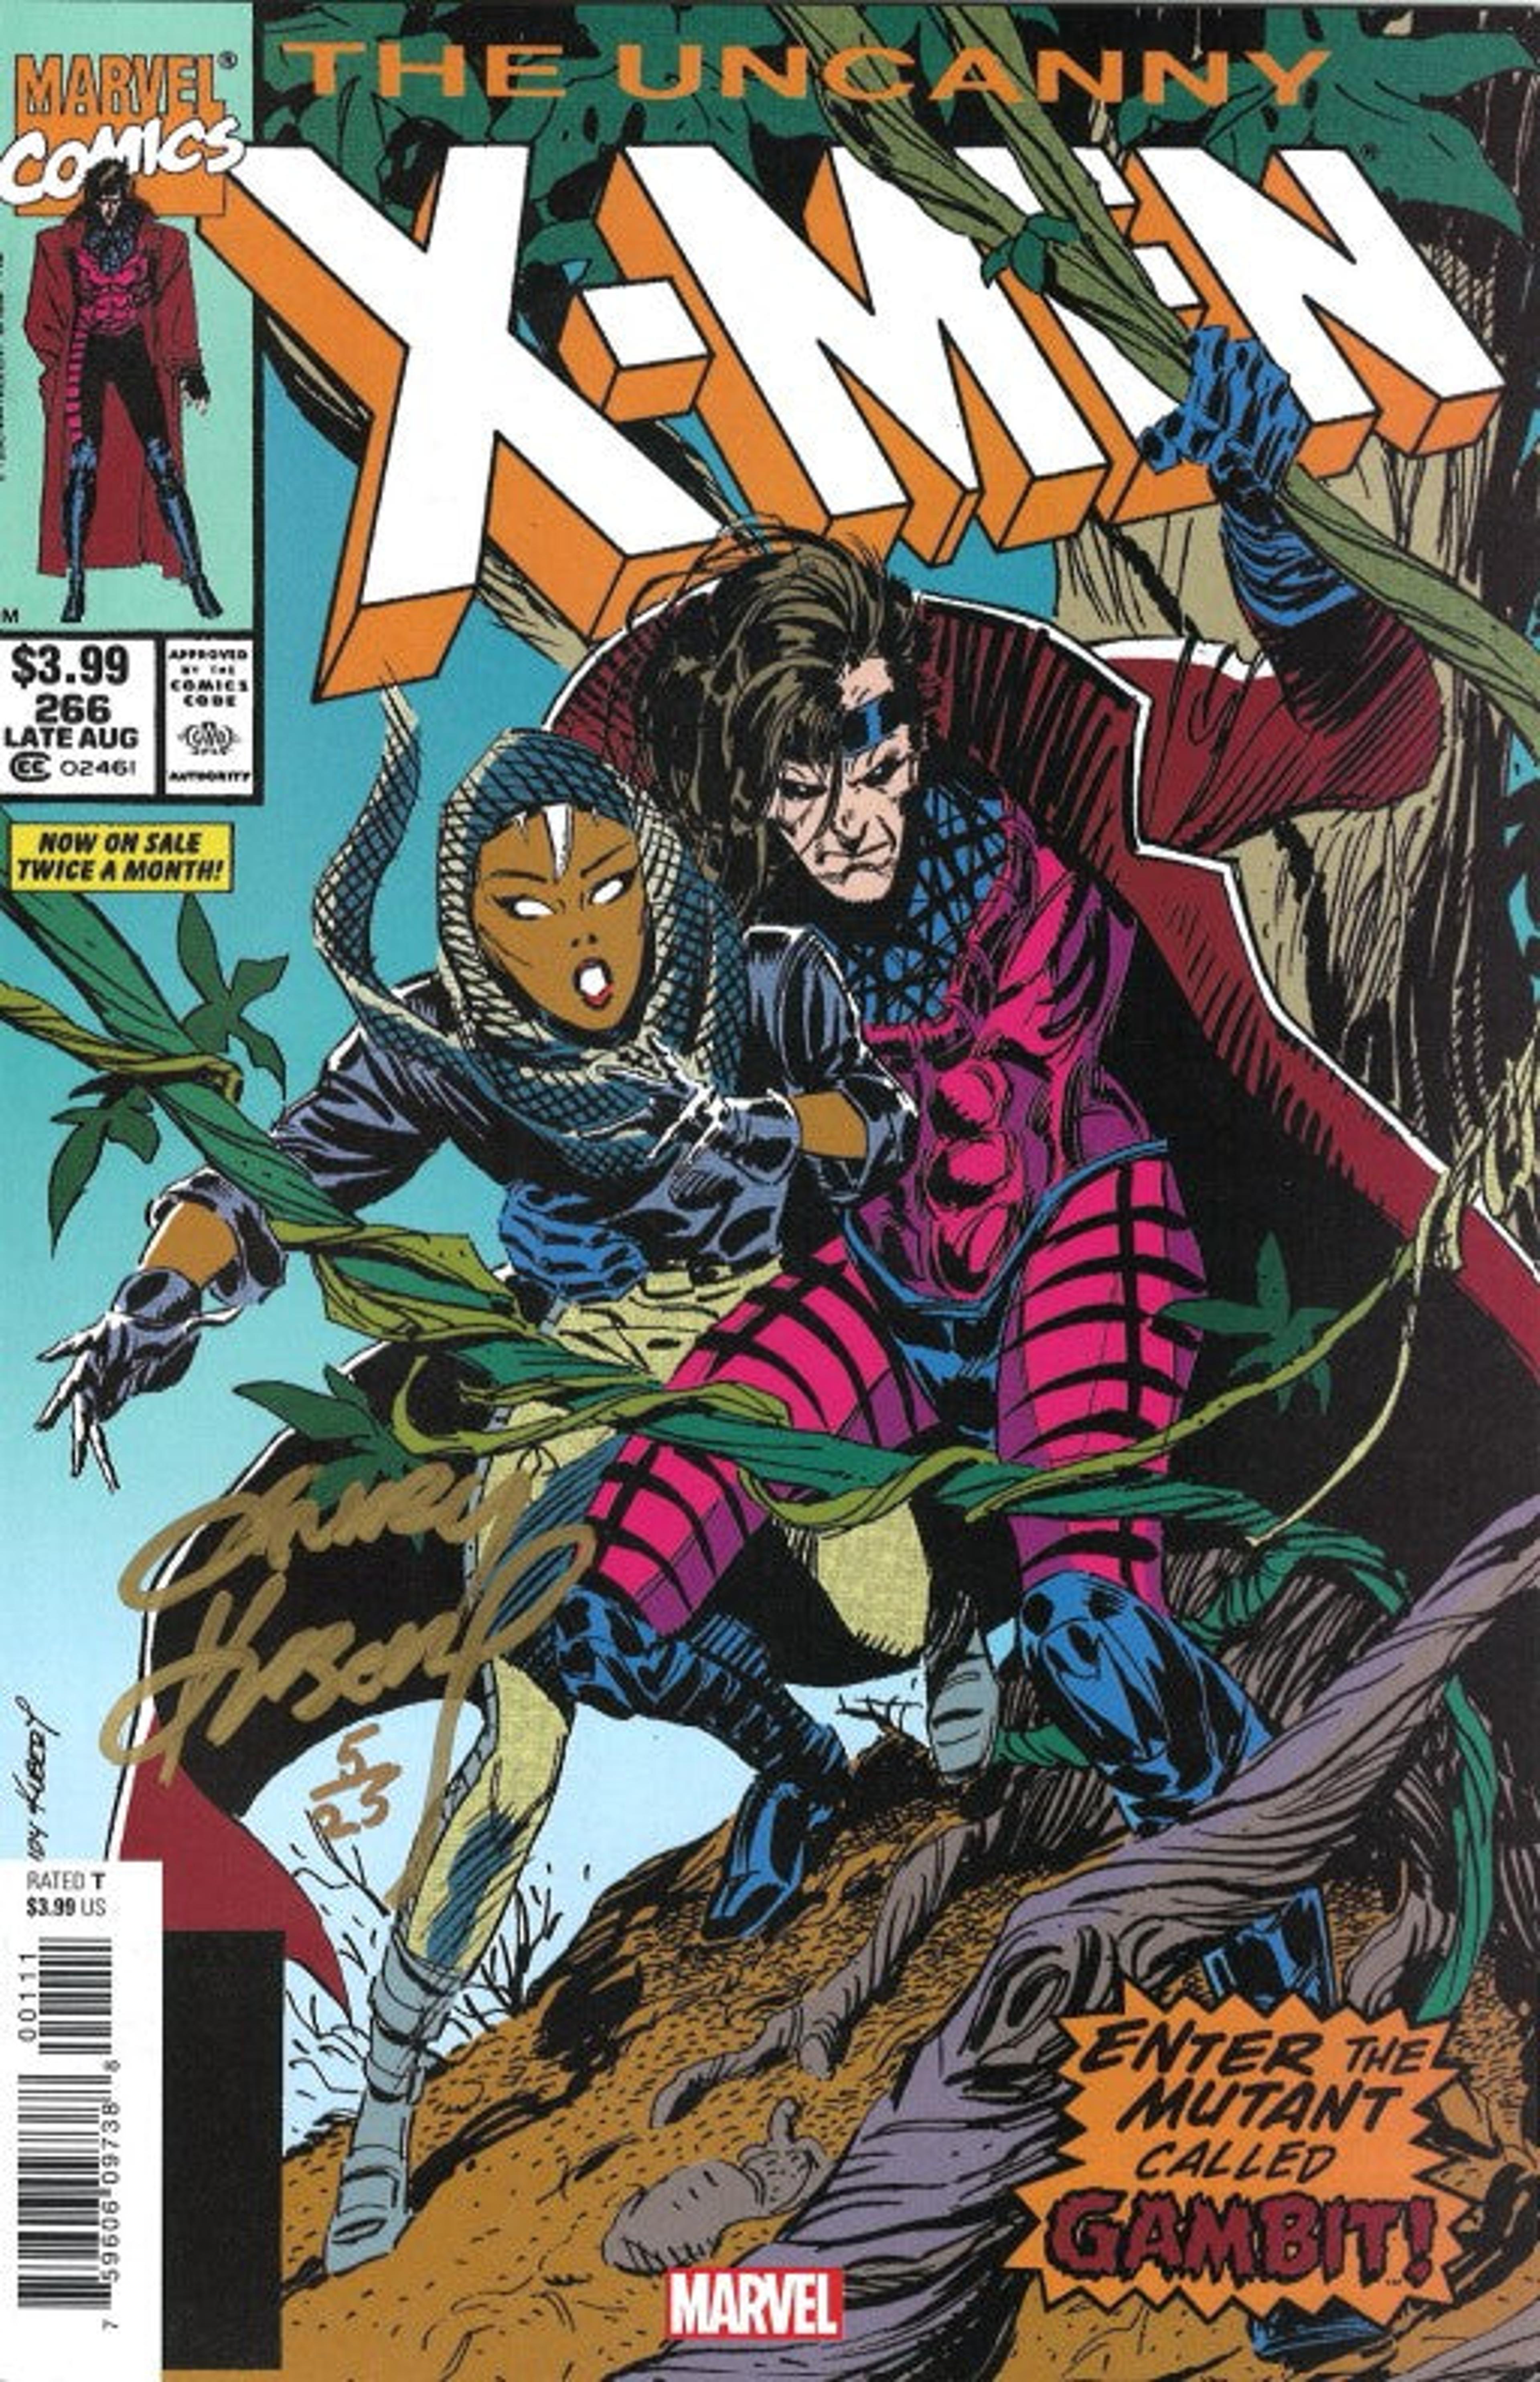 UNCANNY X-MEN #266 FACSIMILE EDITION SIGNED BY ANDY KUBERT